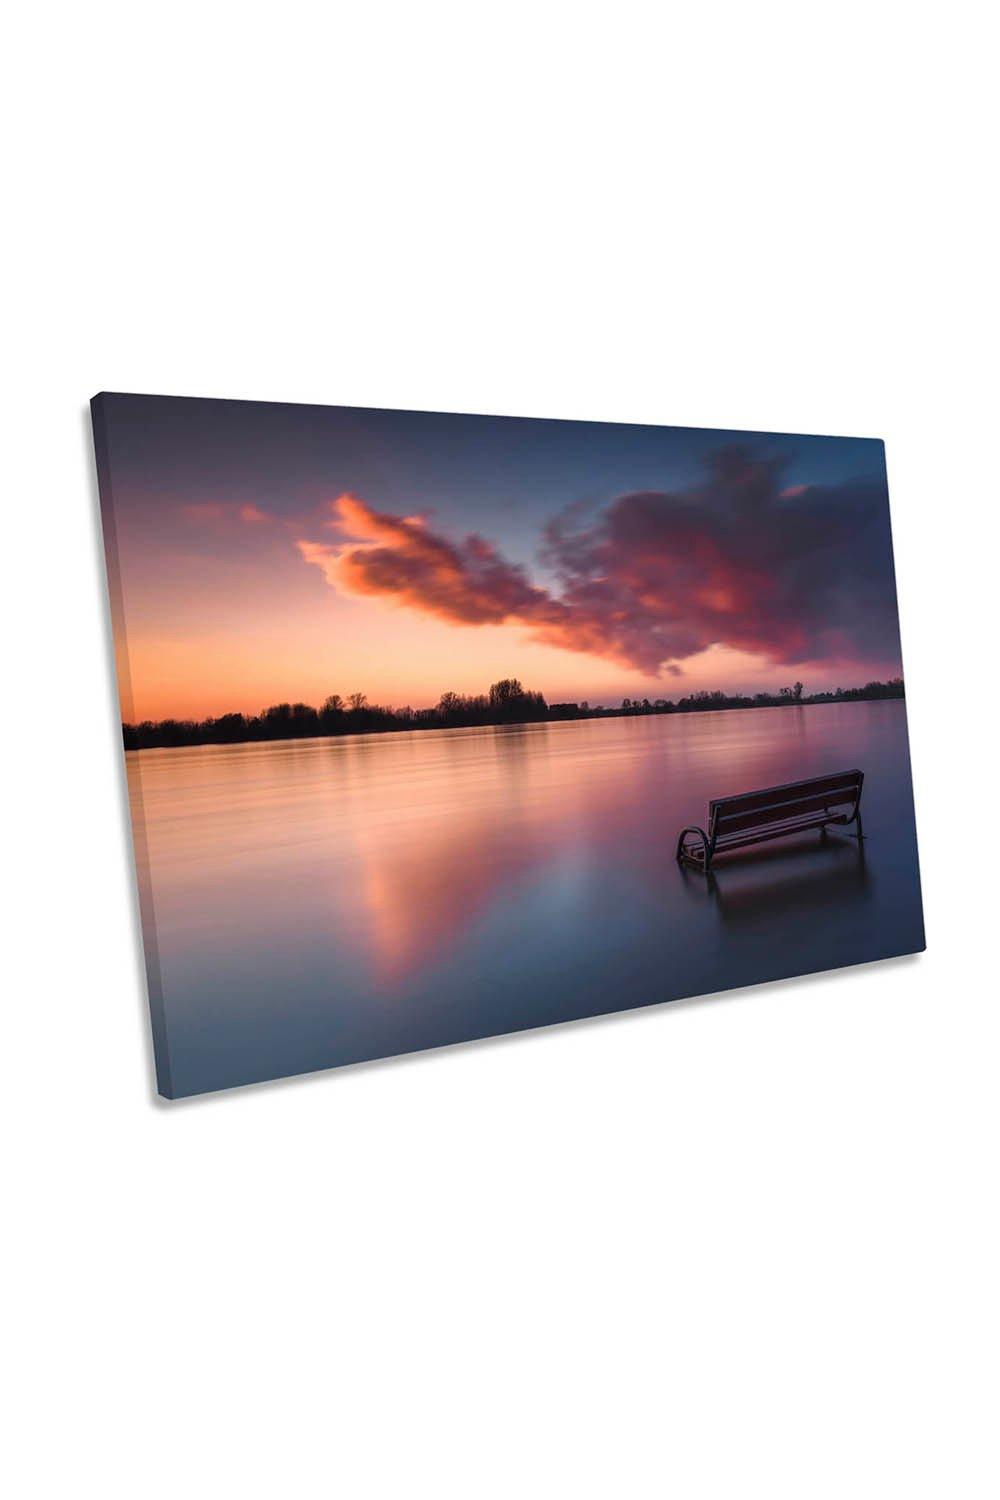 Bench Sky Clouds Sunset Lake Canvas Wall Art Picture Print